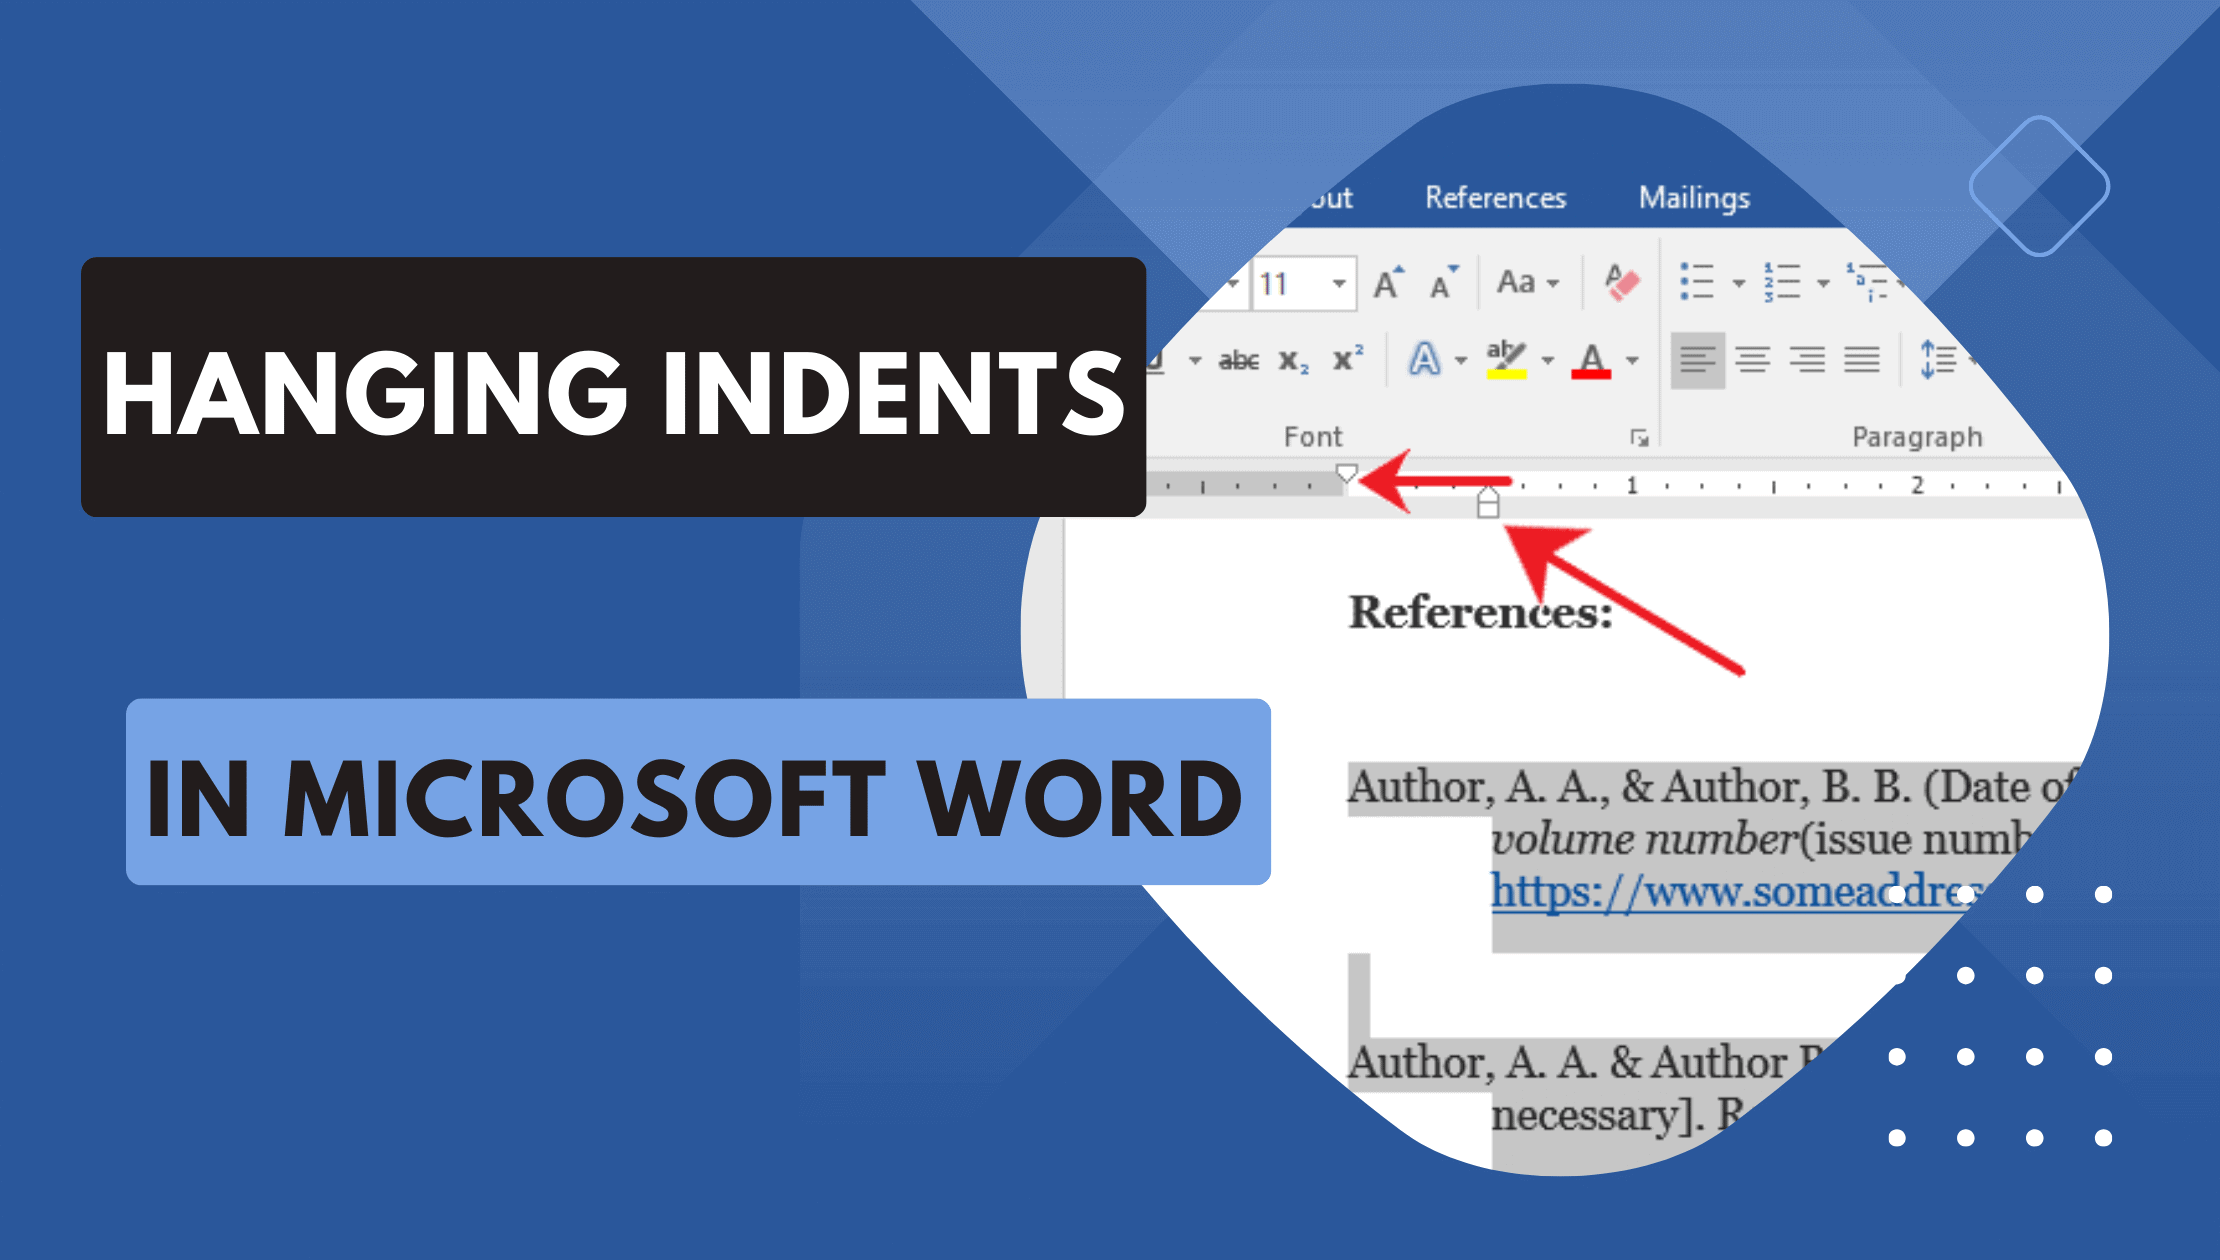 7 Simple Steps to Mastering Hanging Indents in Microsoft Word